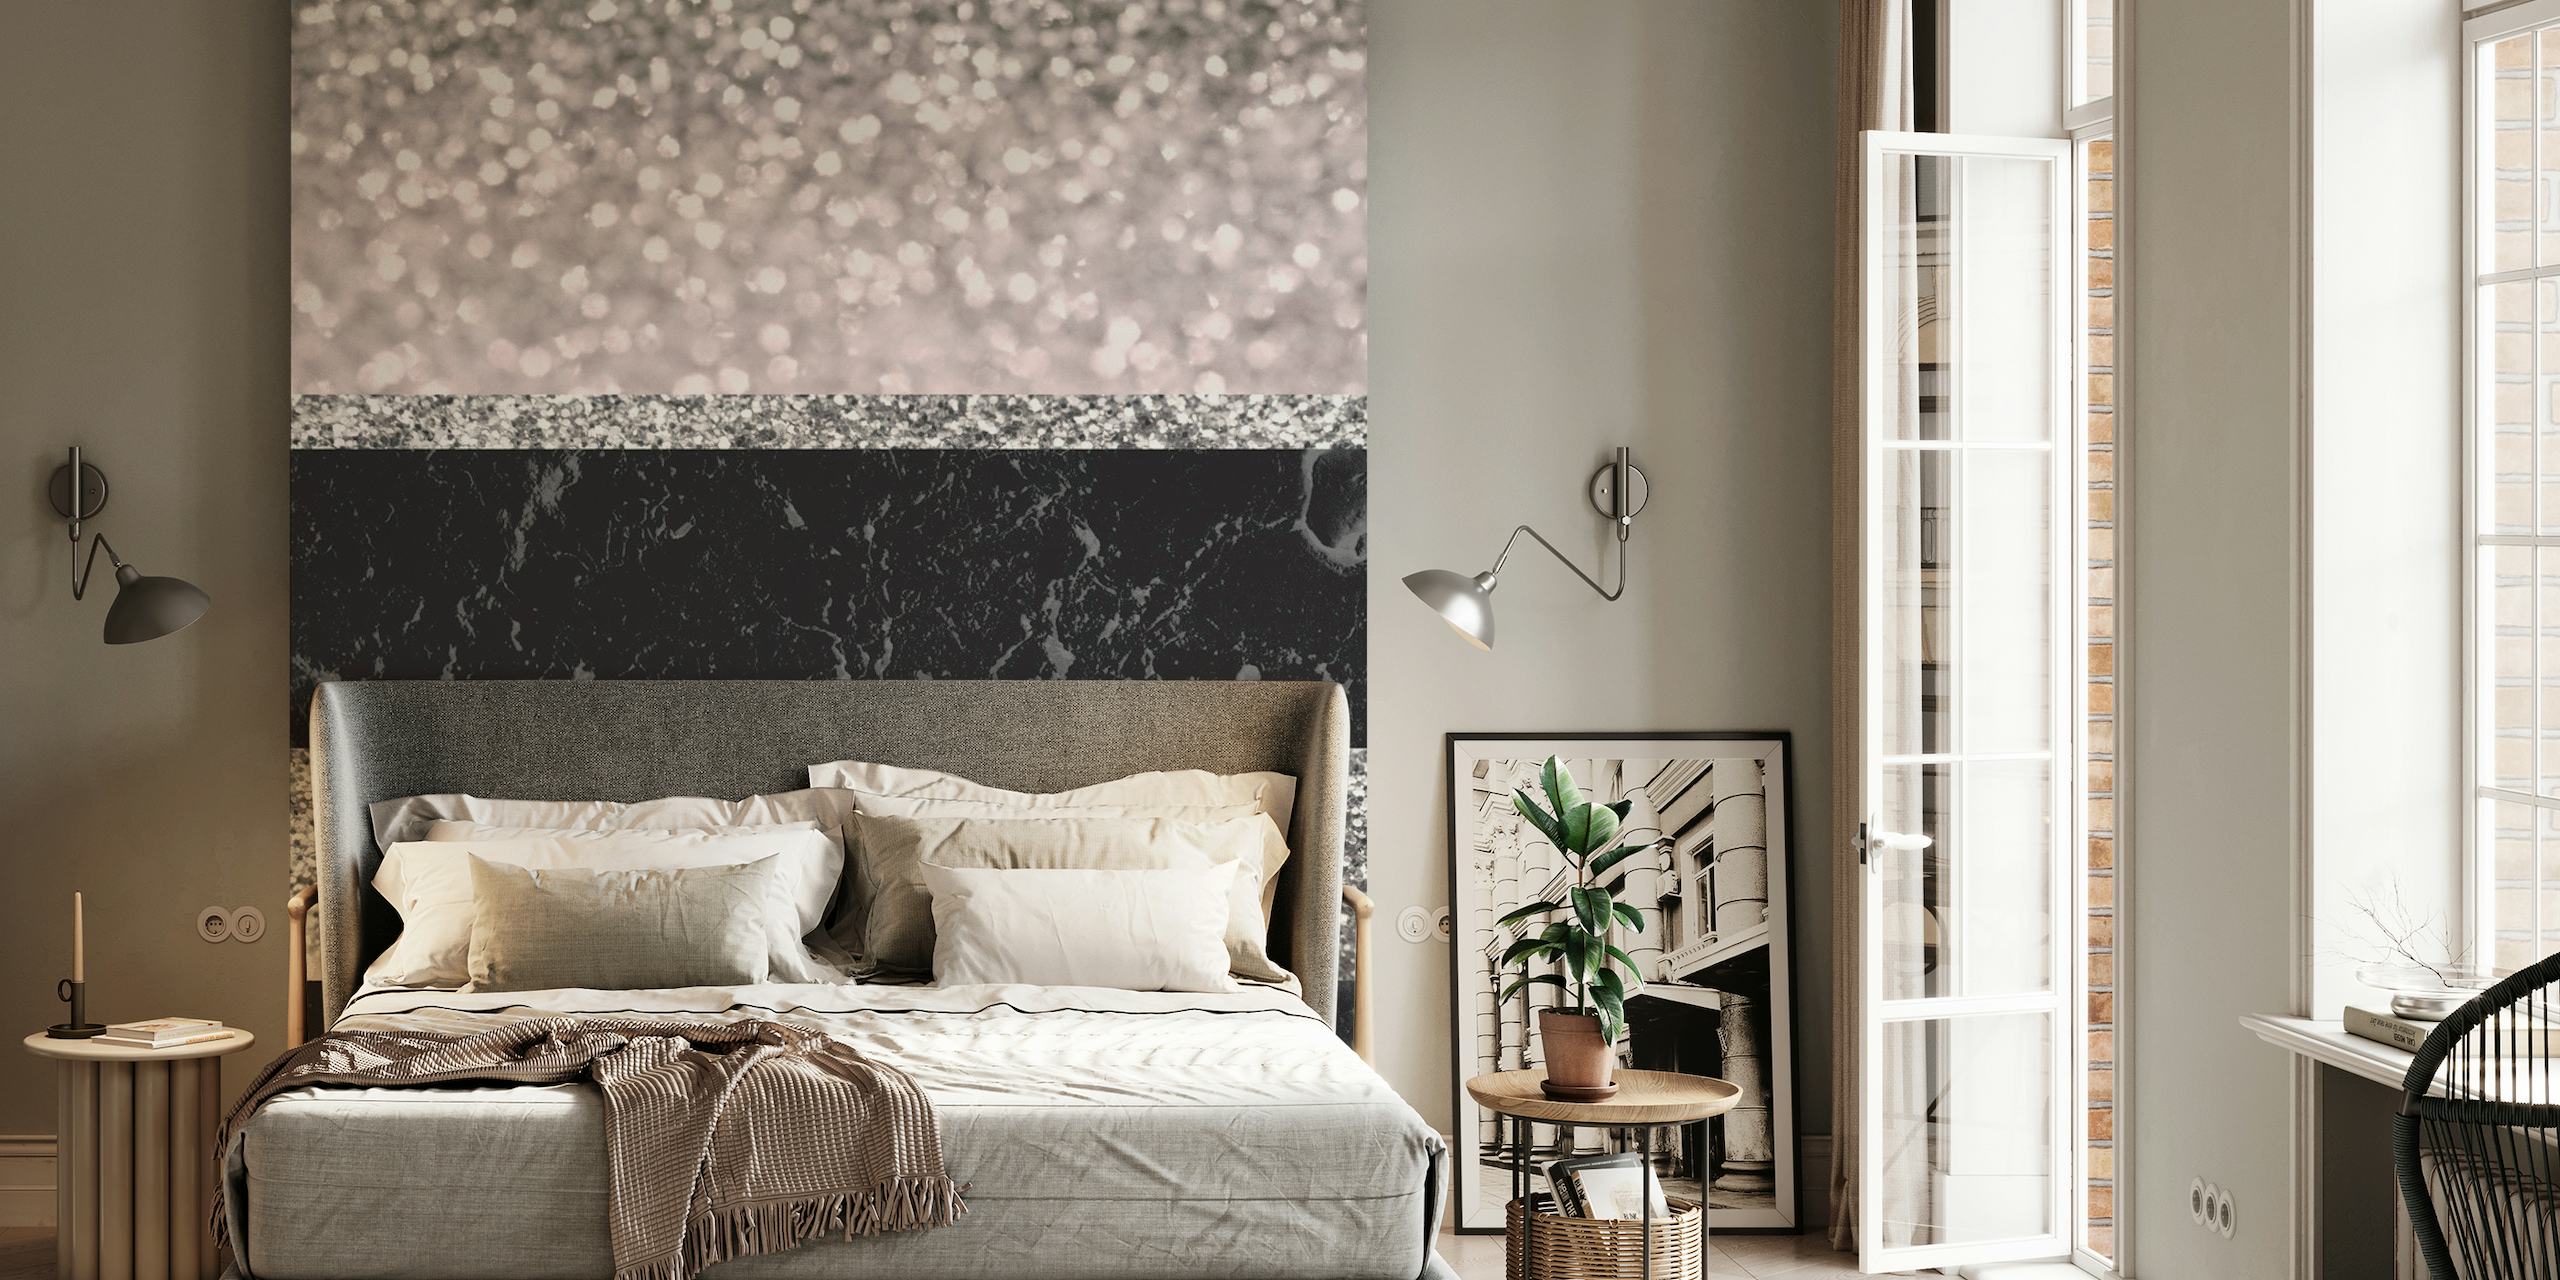 Gray and black marble wall mural with glittering silver details